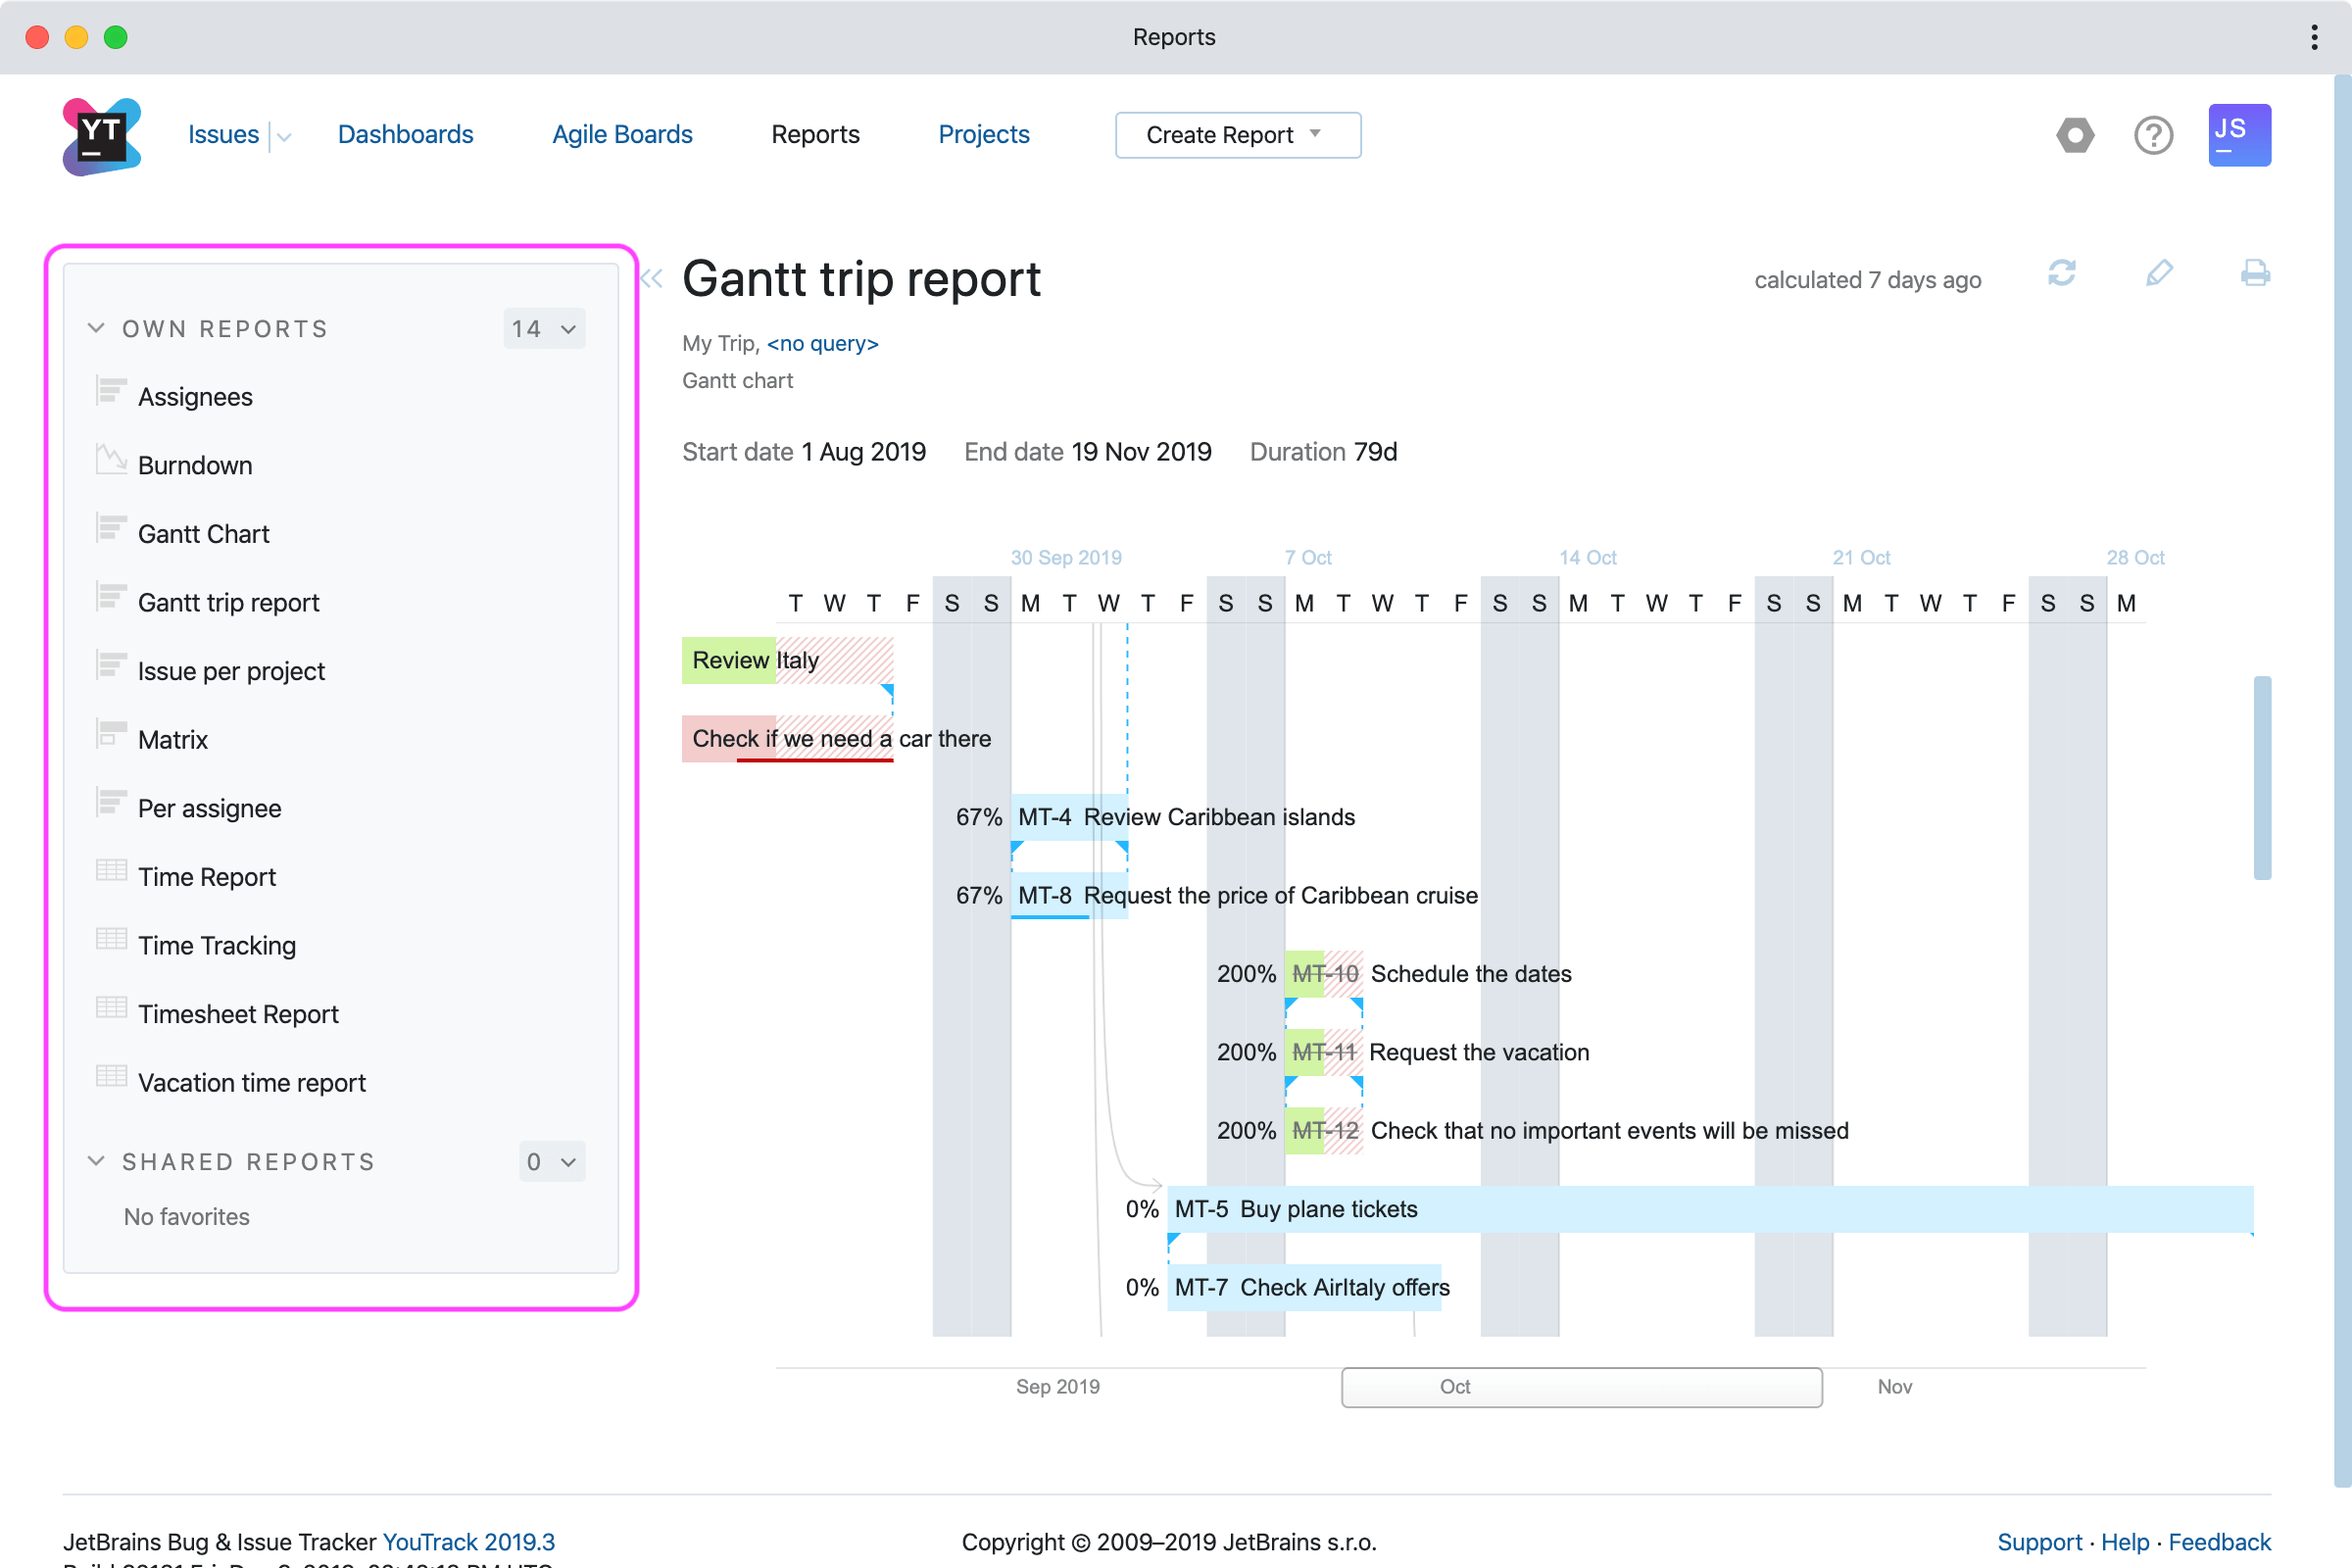 Improved Navigation for Reports